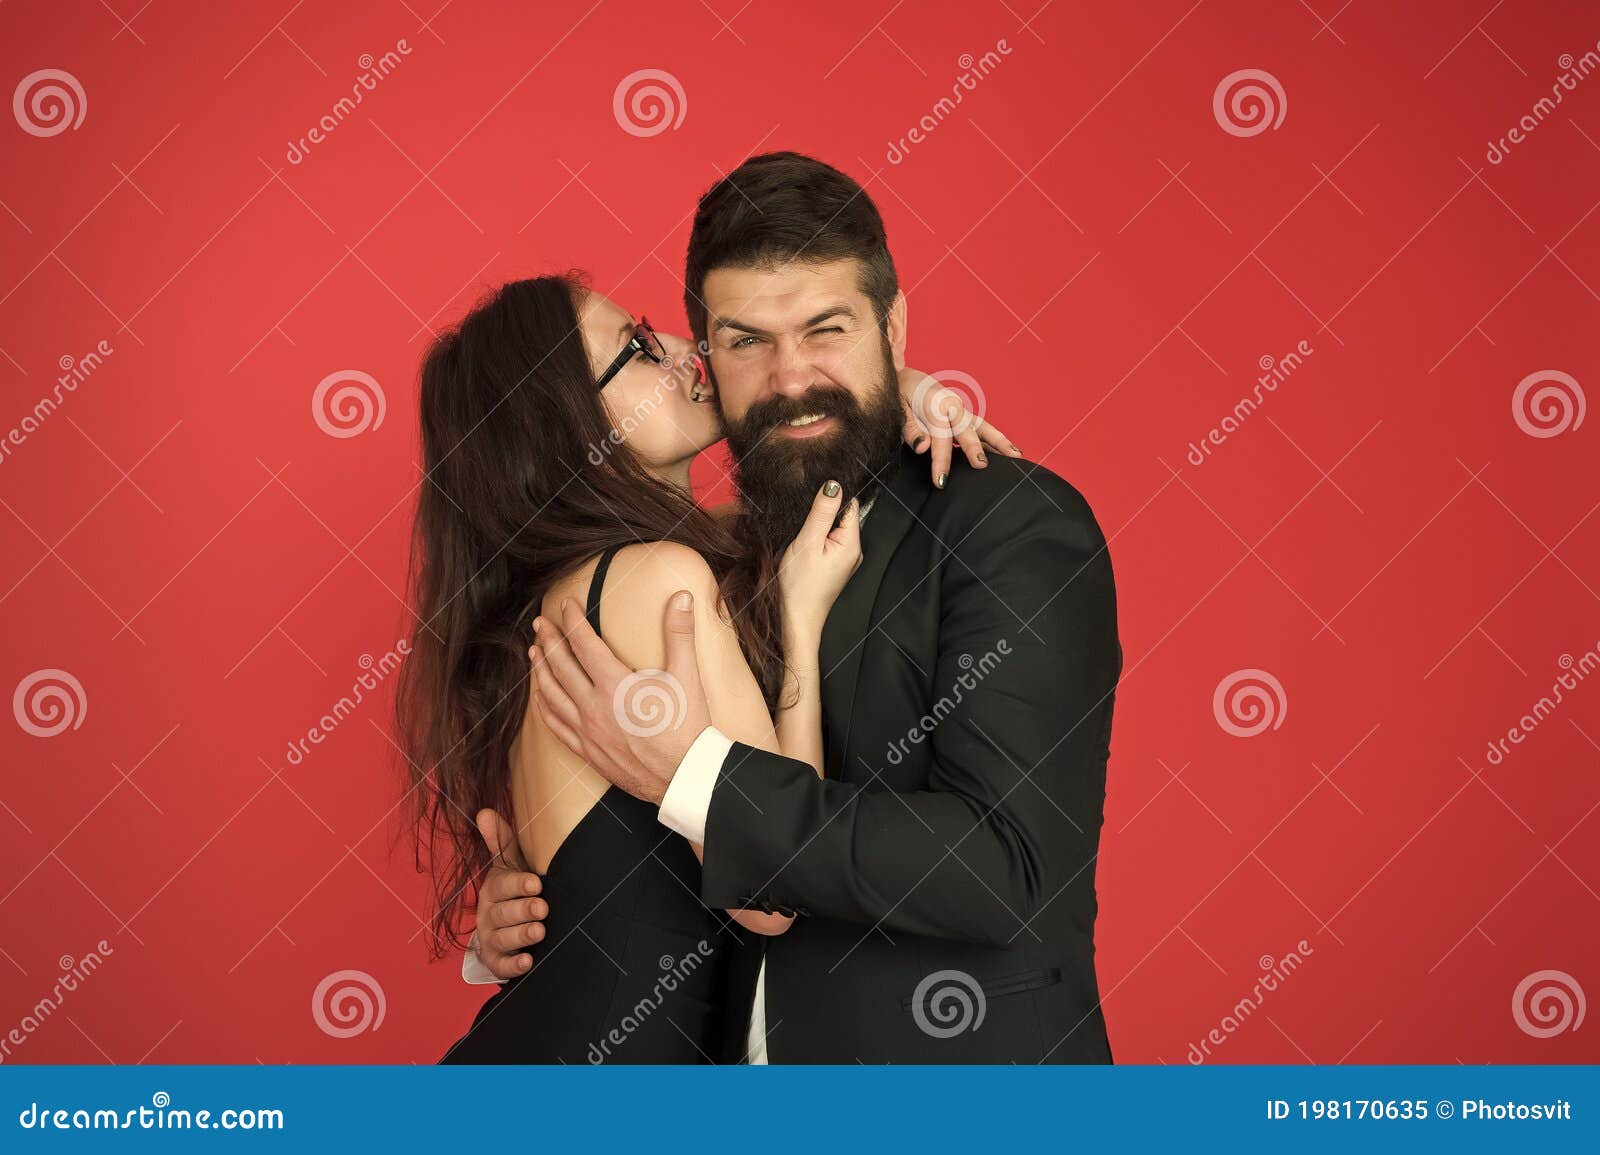 Fall in love at first kiss movie eng sub download Love At First Bite Couple In Love Enjoy Flirtation Flirtation Between Girl And Bearded Man Flirtation And Stock Image Image Of Formal Formalwear 198170635